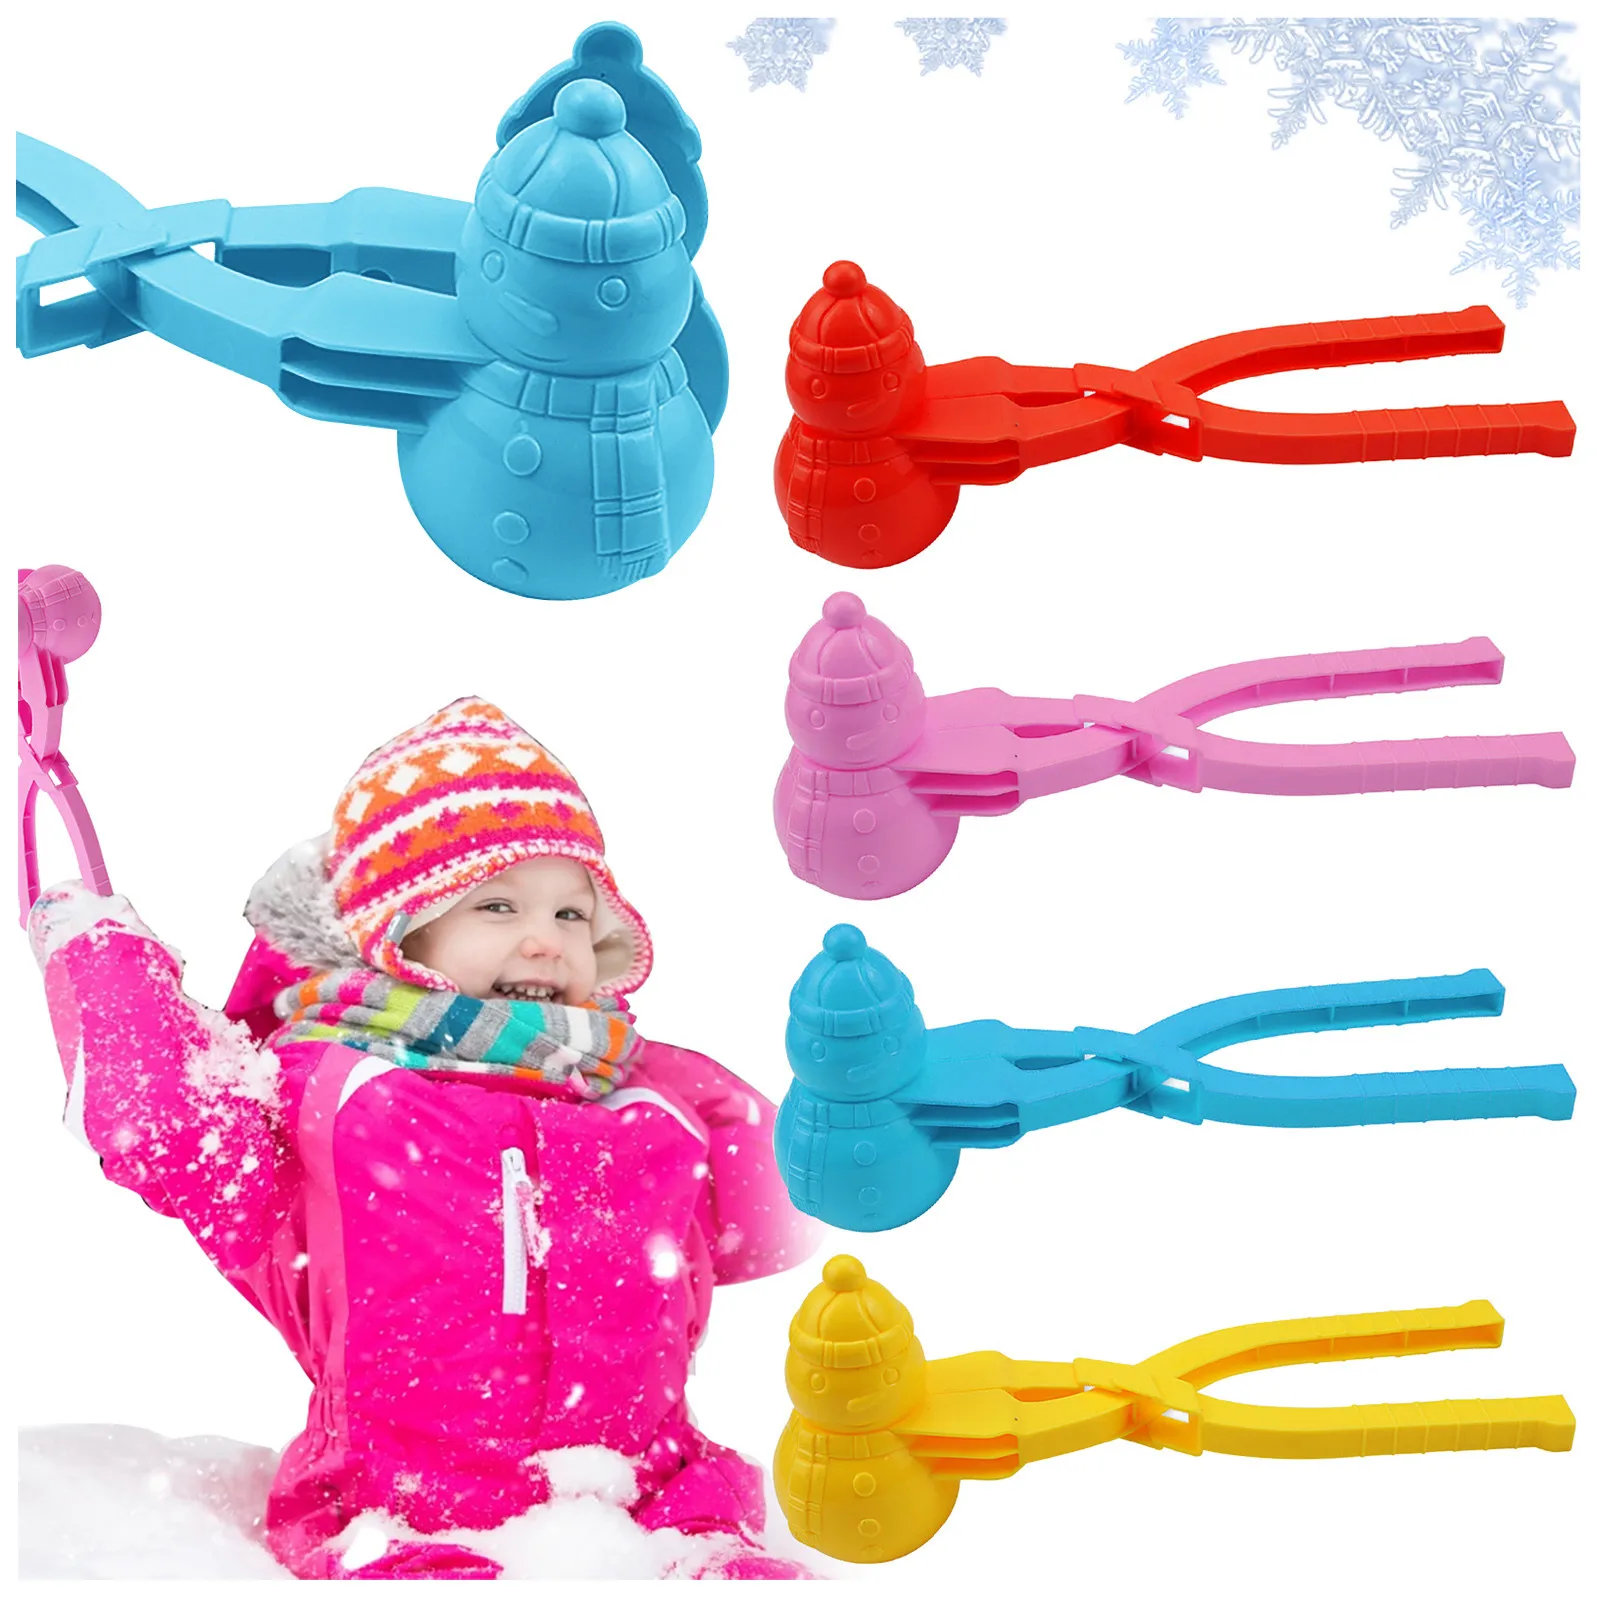 Snowman Shaped Snowball Maker Clip Children Outdoor Snow Sand Mold Tool Toy 